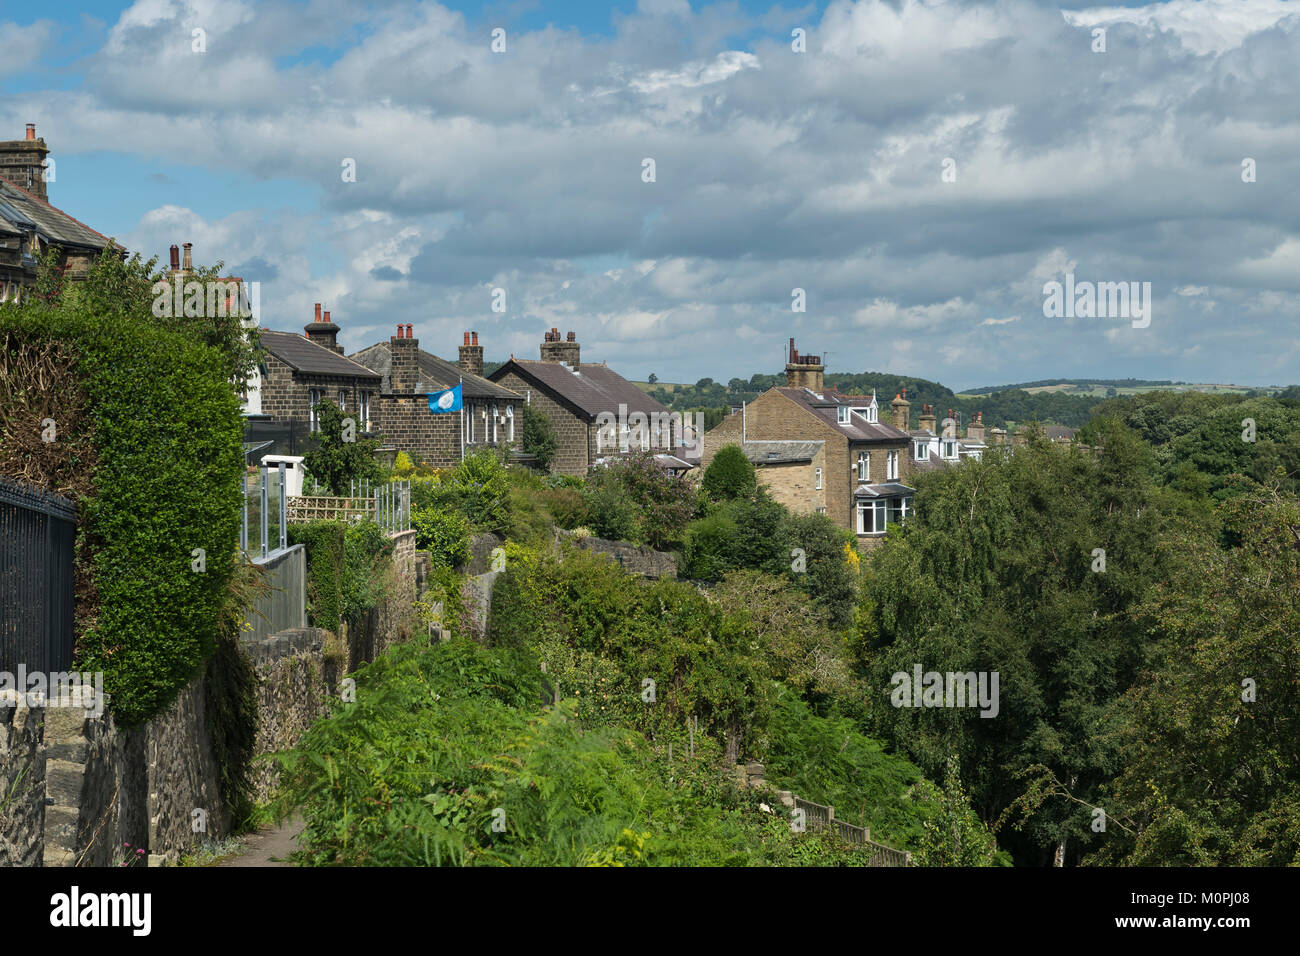 View under blue sky along row of stone houses (semis) situated at top of Baildon Bank, a steep wooded cliff - Shipley, West Yorkshire, England, UK. Stock Photo